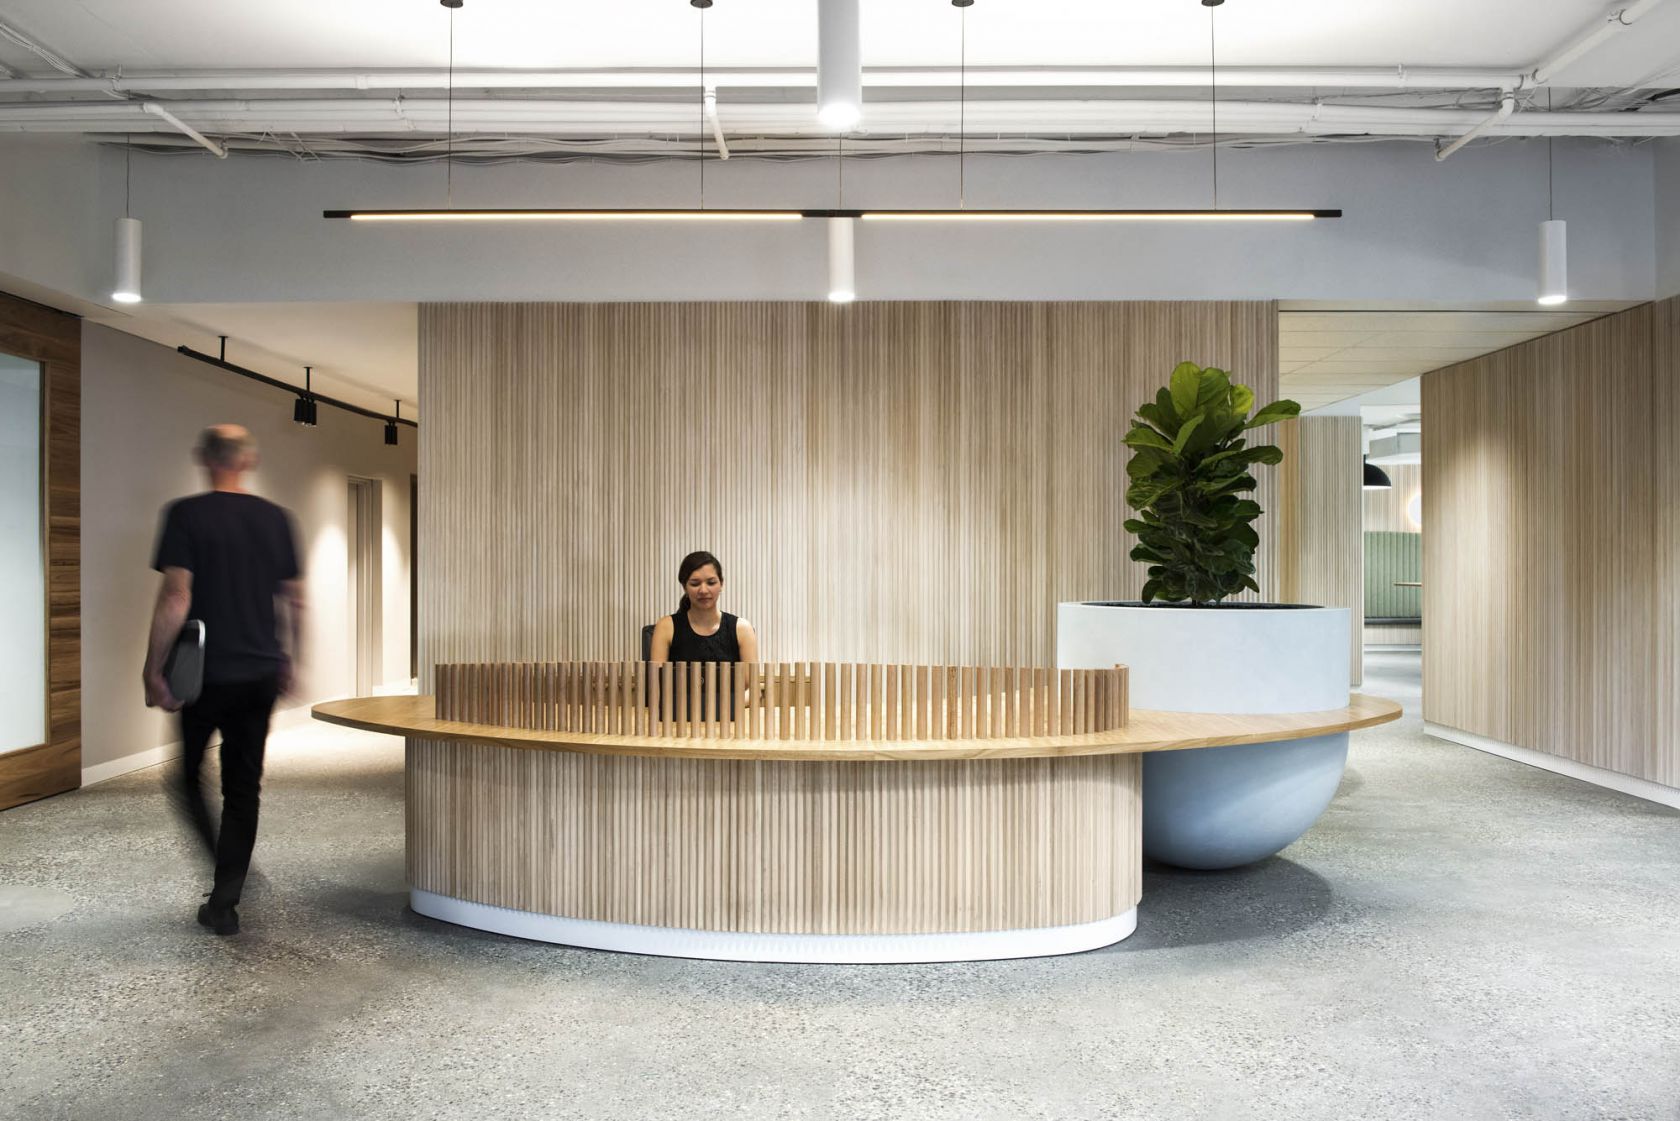 Office Fitouts